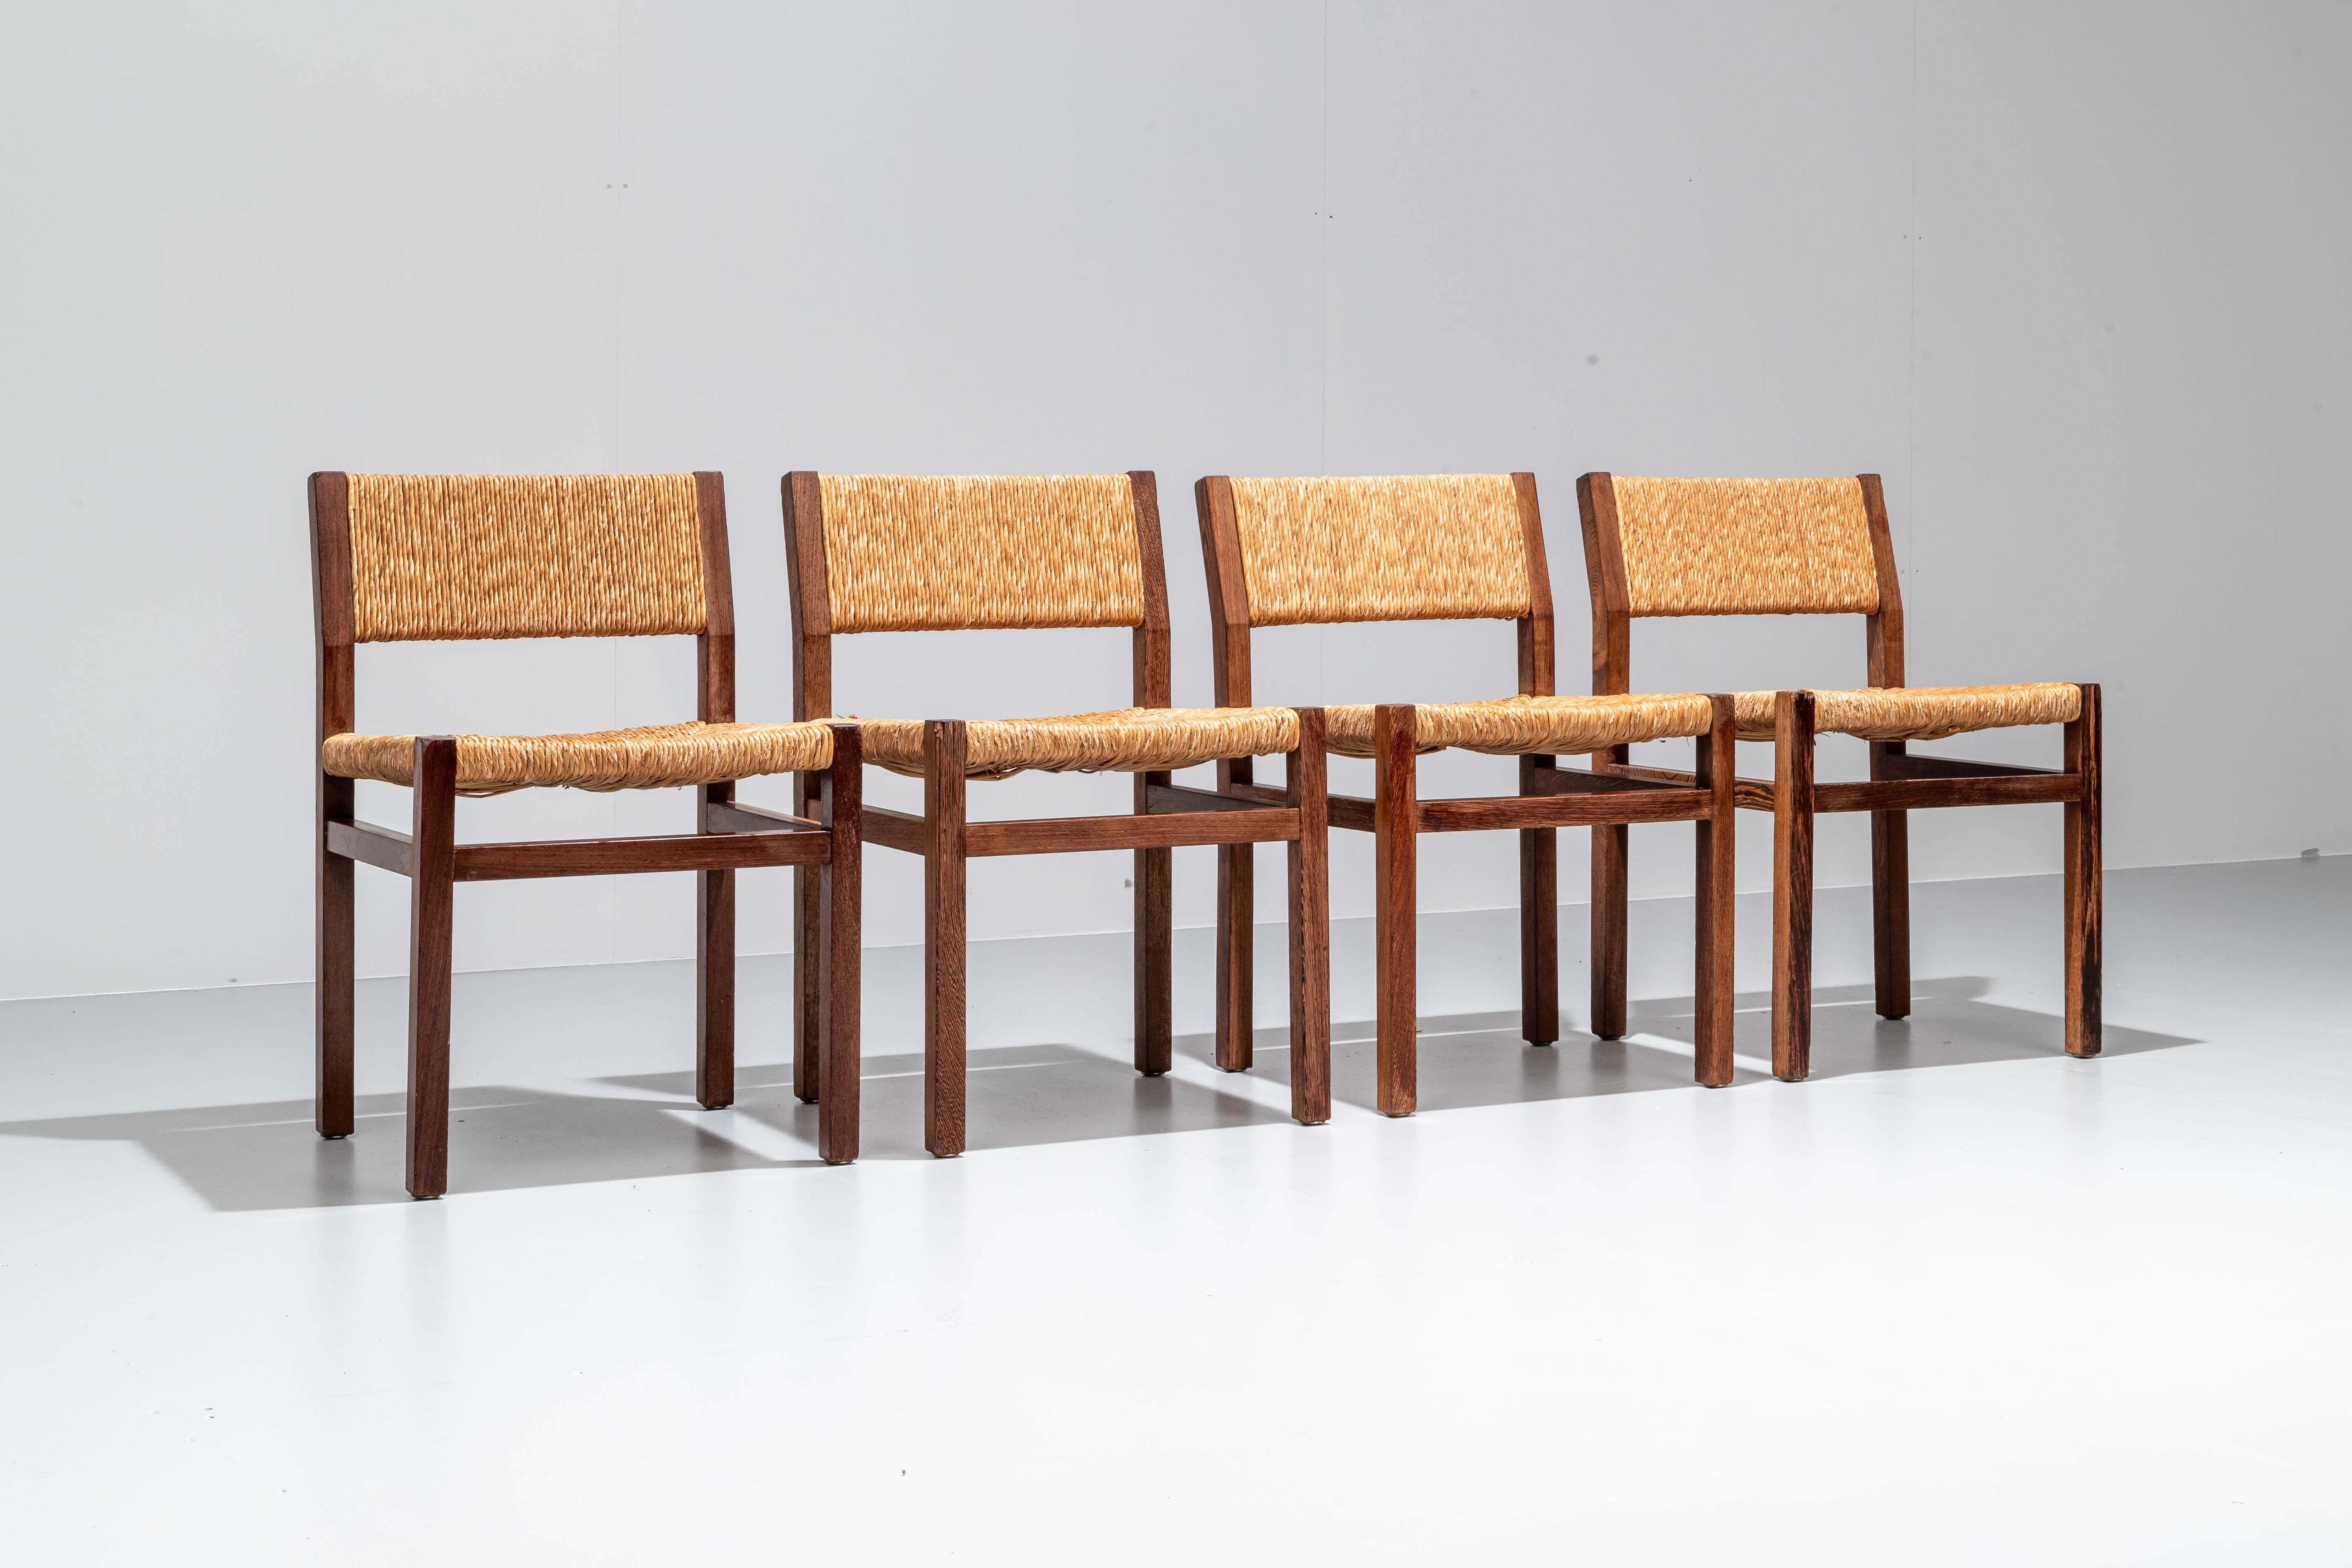 Mid-Century Modern Set of 4 Dining Chairs by Martin Visser for 'T Spectrum in Wengé Hardwood, 1967